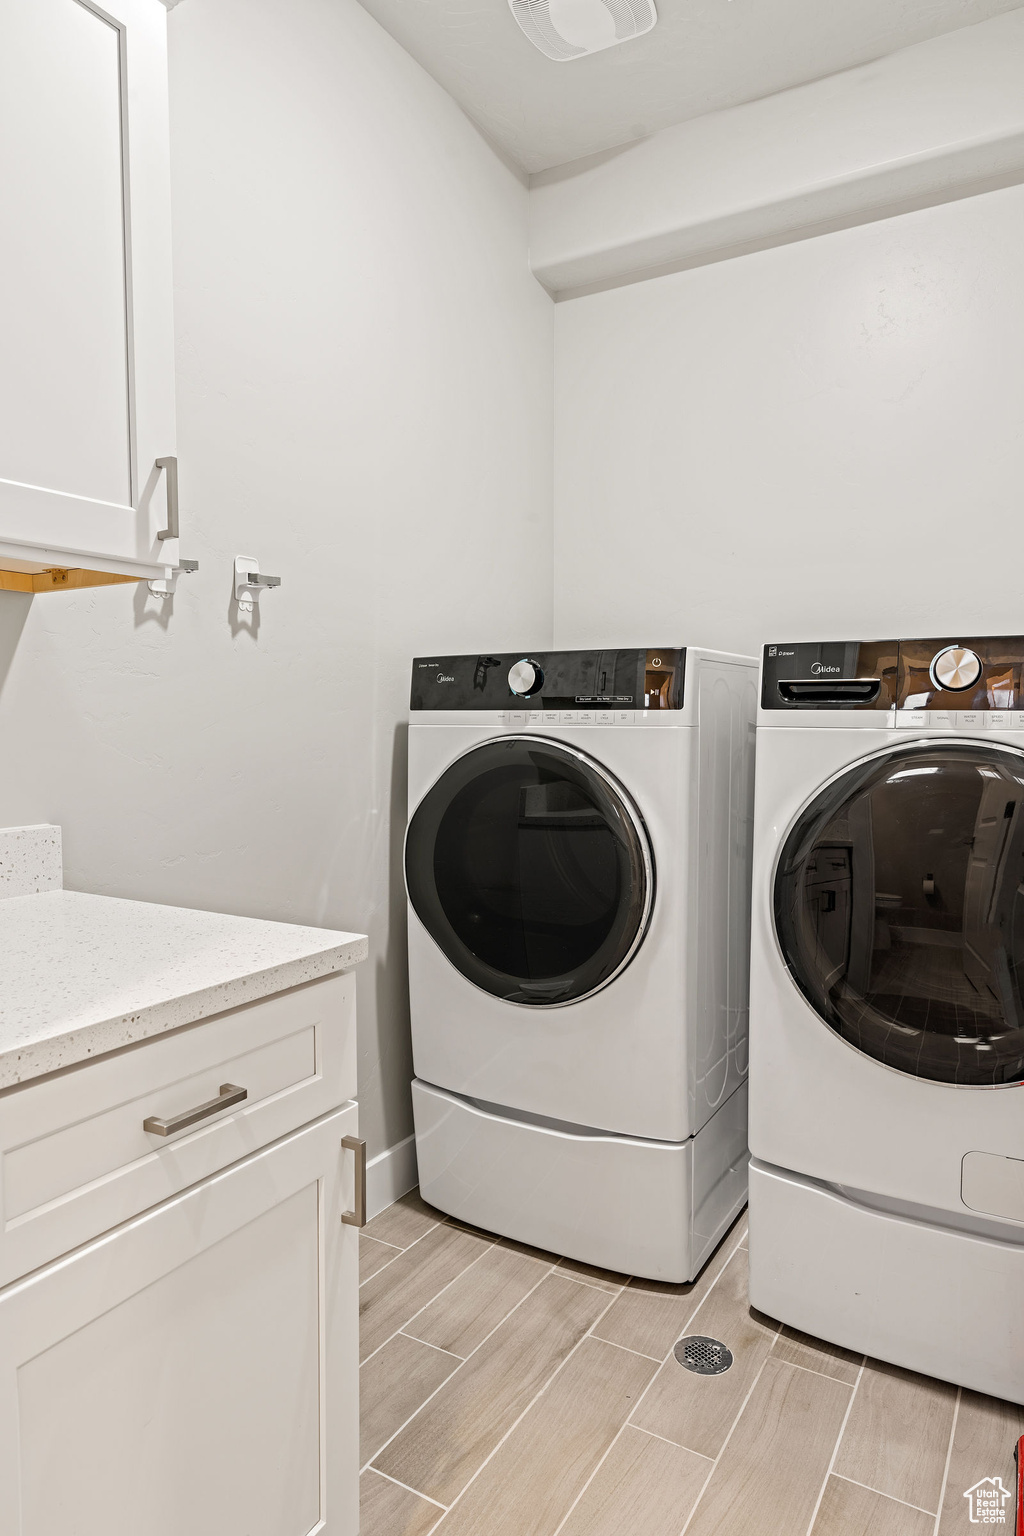 Clothes washing area with cabinets, light hardwood / wood-style floors, and washer and clothes dryer